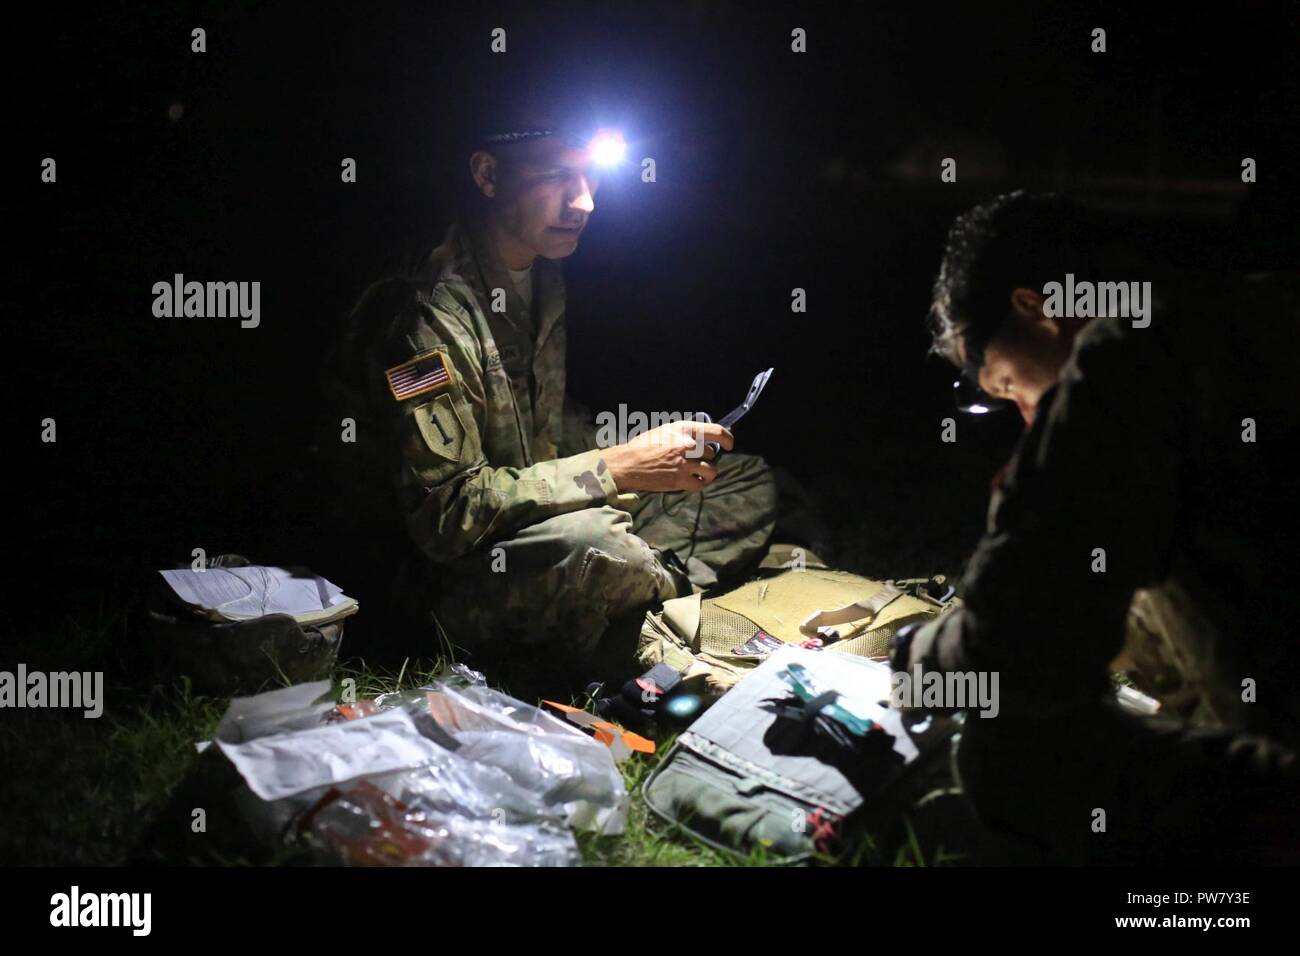 U.S. Army Staff Sgt. Eric Jonier and Staff Sgt. Mkakauet Generauax, both assigned to the Lyster Army Community Hospital, pack their medical bags before the simulated Mass Casualty Event during the 2017 Best Medic Competition at Fort Bragg, N.C., Sep. 18-21, 2017. The competition tested the physical and mental toughness, as well as the technical competence, of each medic to identify the team moving forward to represent the region at the next level of the competition. Stock Photo